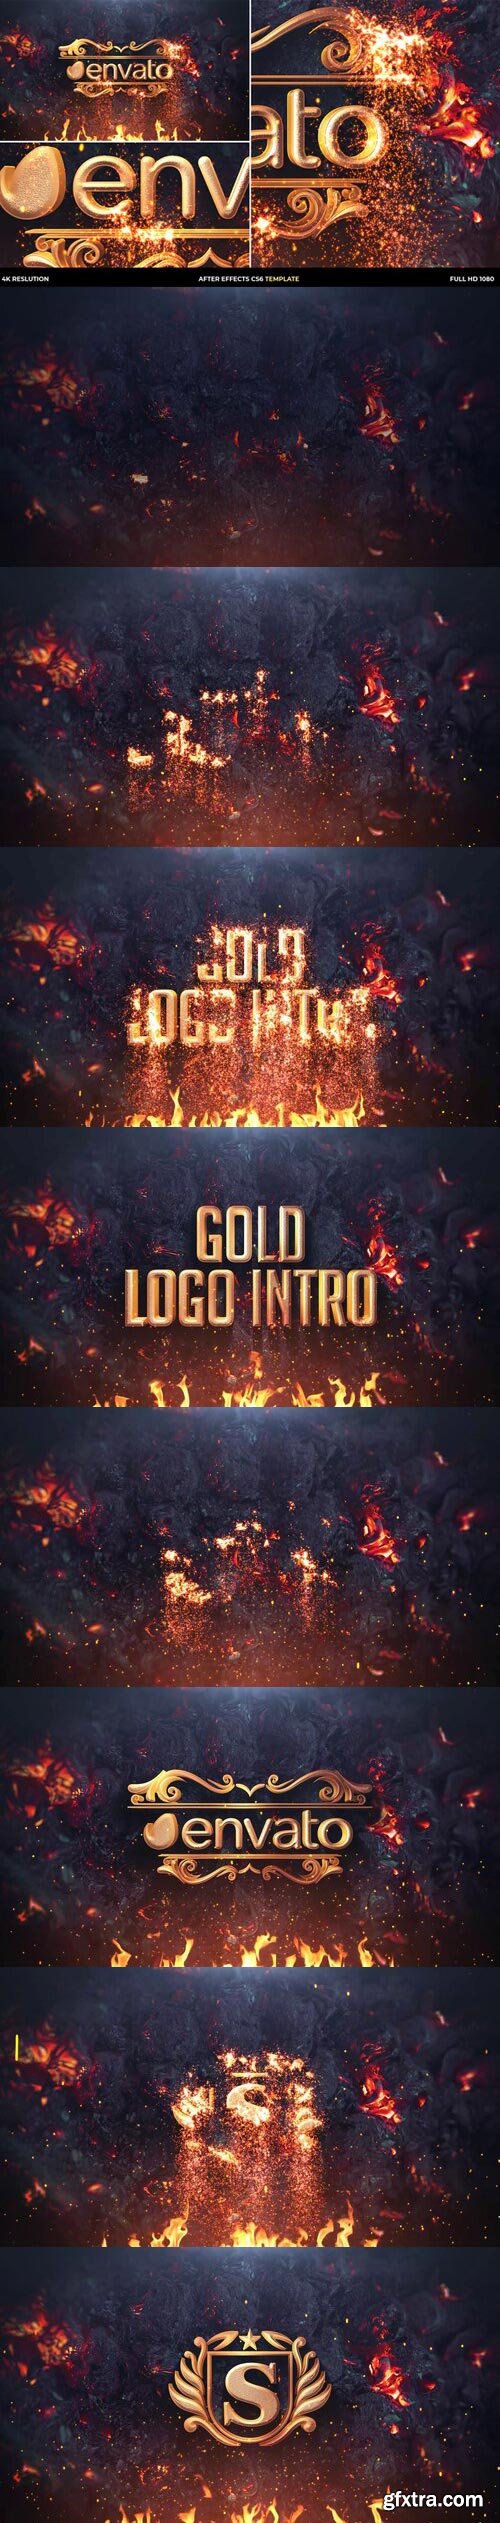 Videohive - Gold Particles Logo Intro - 30270705